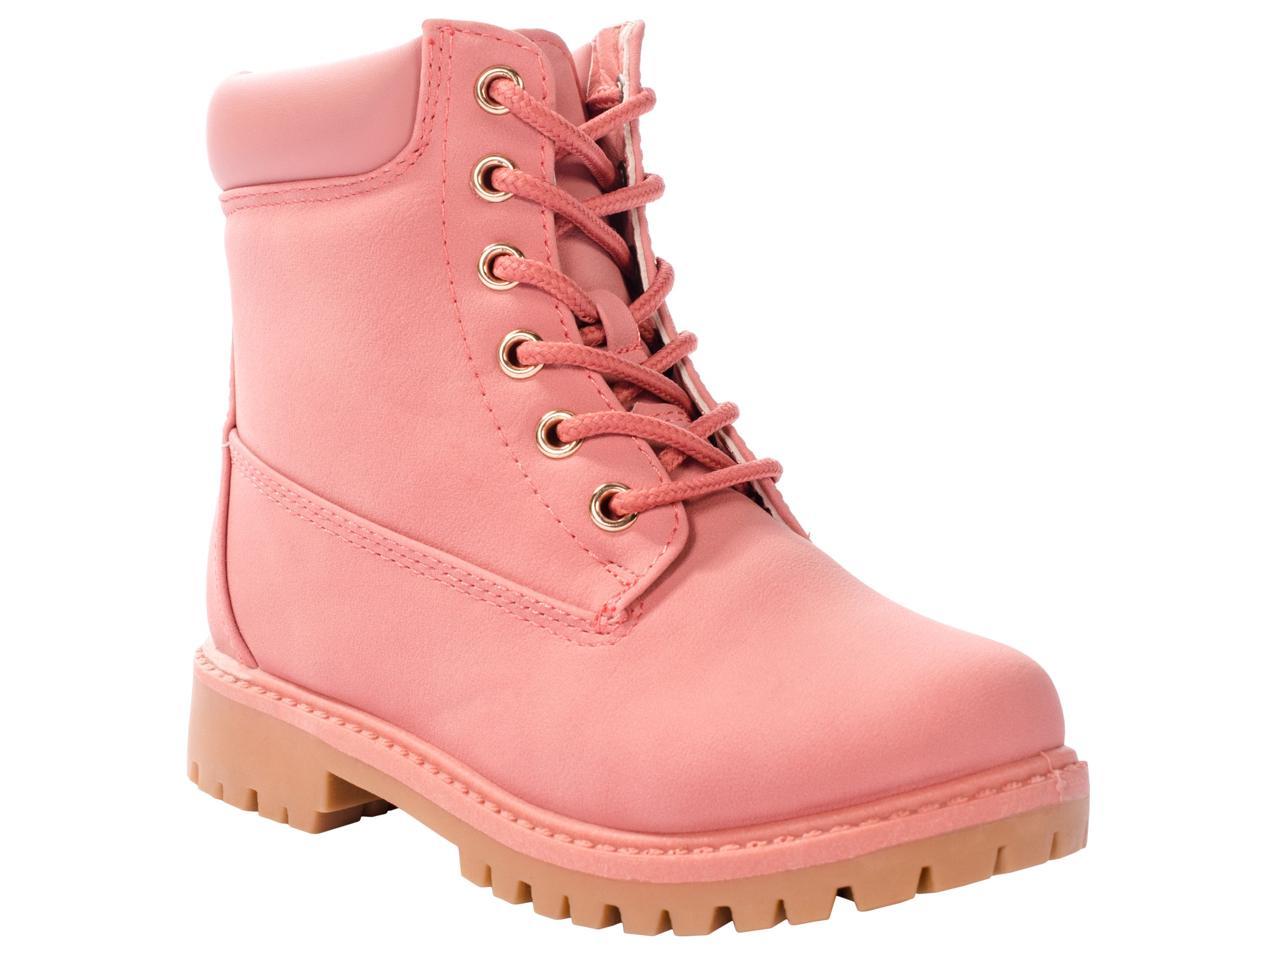 hiking boots pink